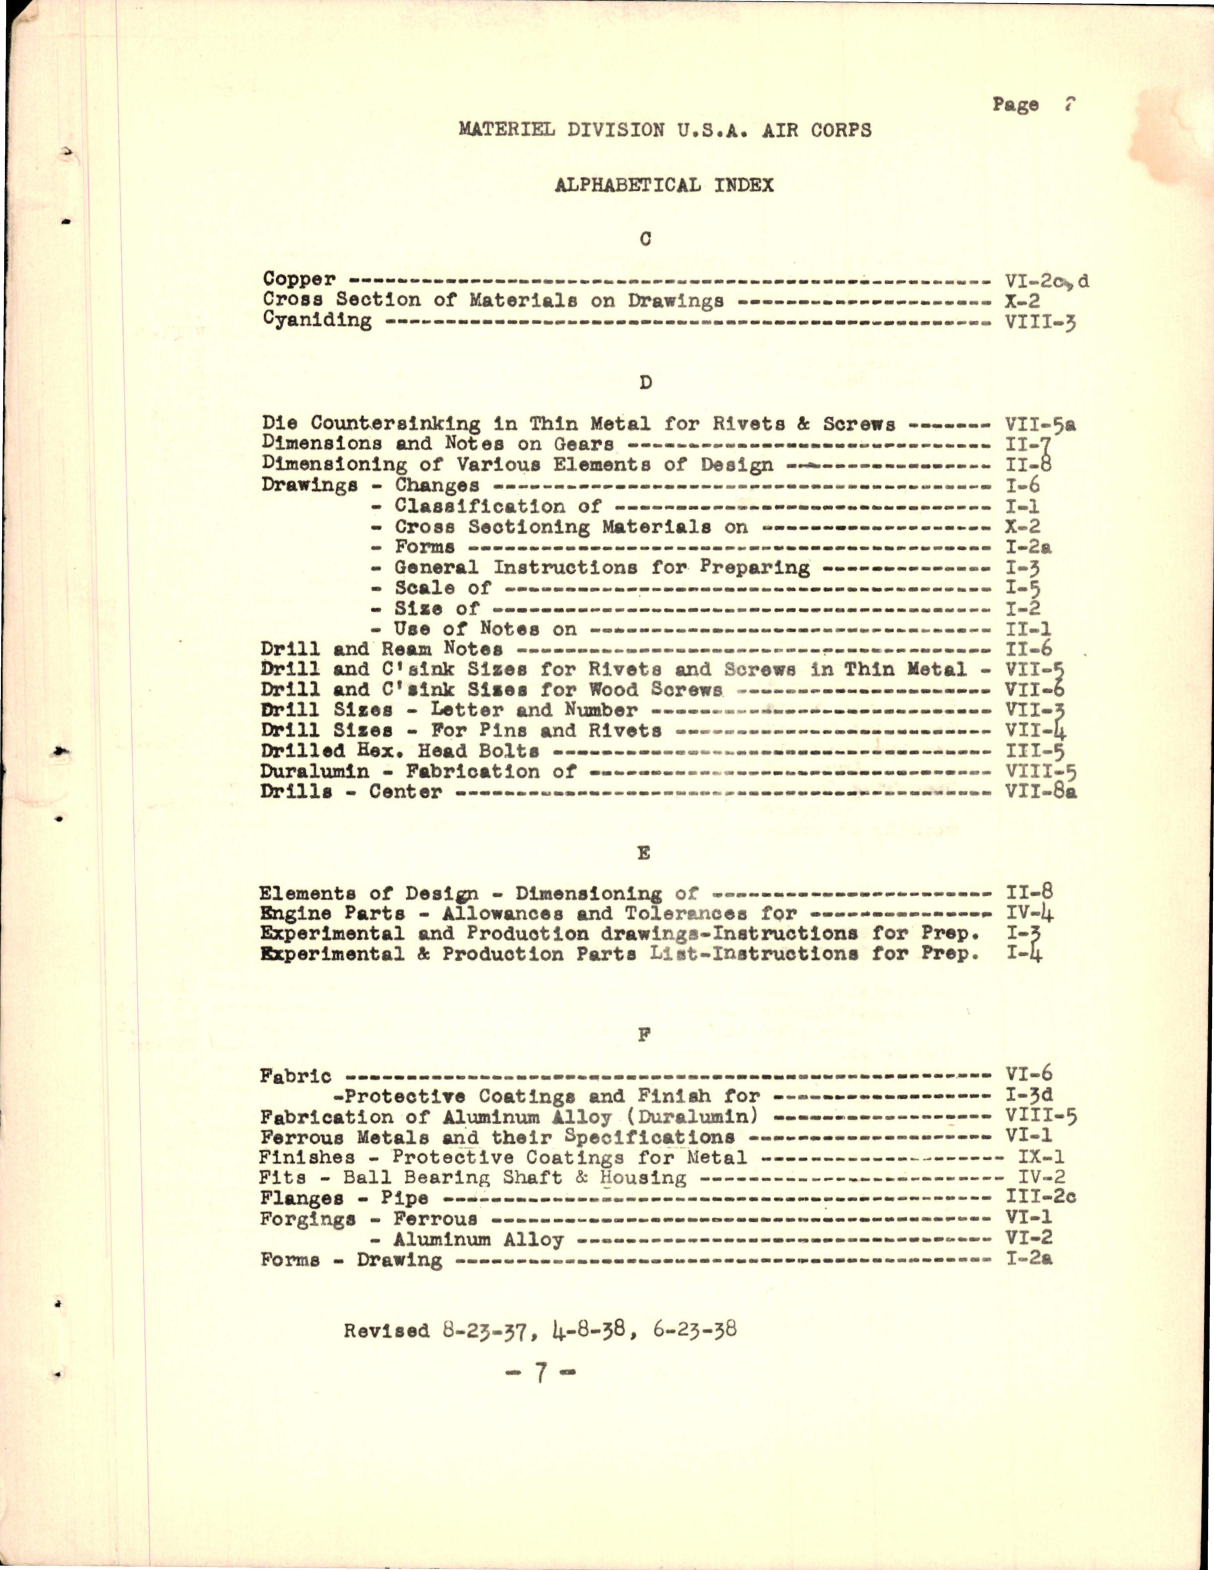 Sample page 9 from AirCorps Library document: Drafting Room Manual